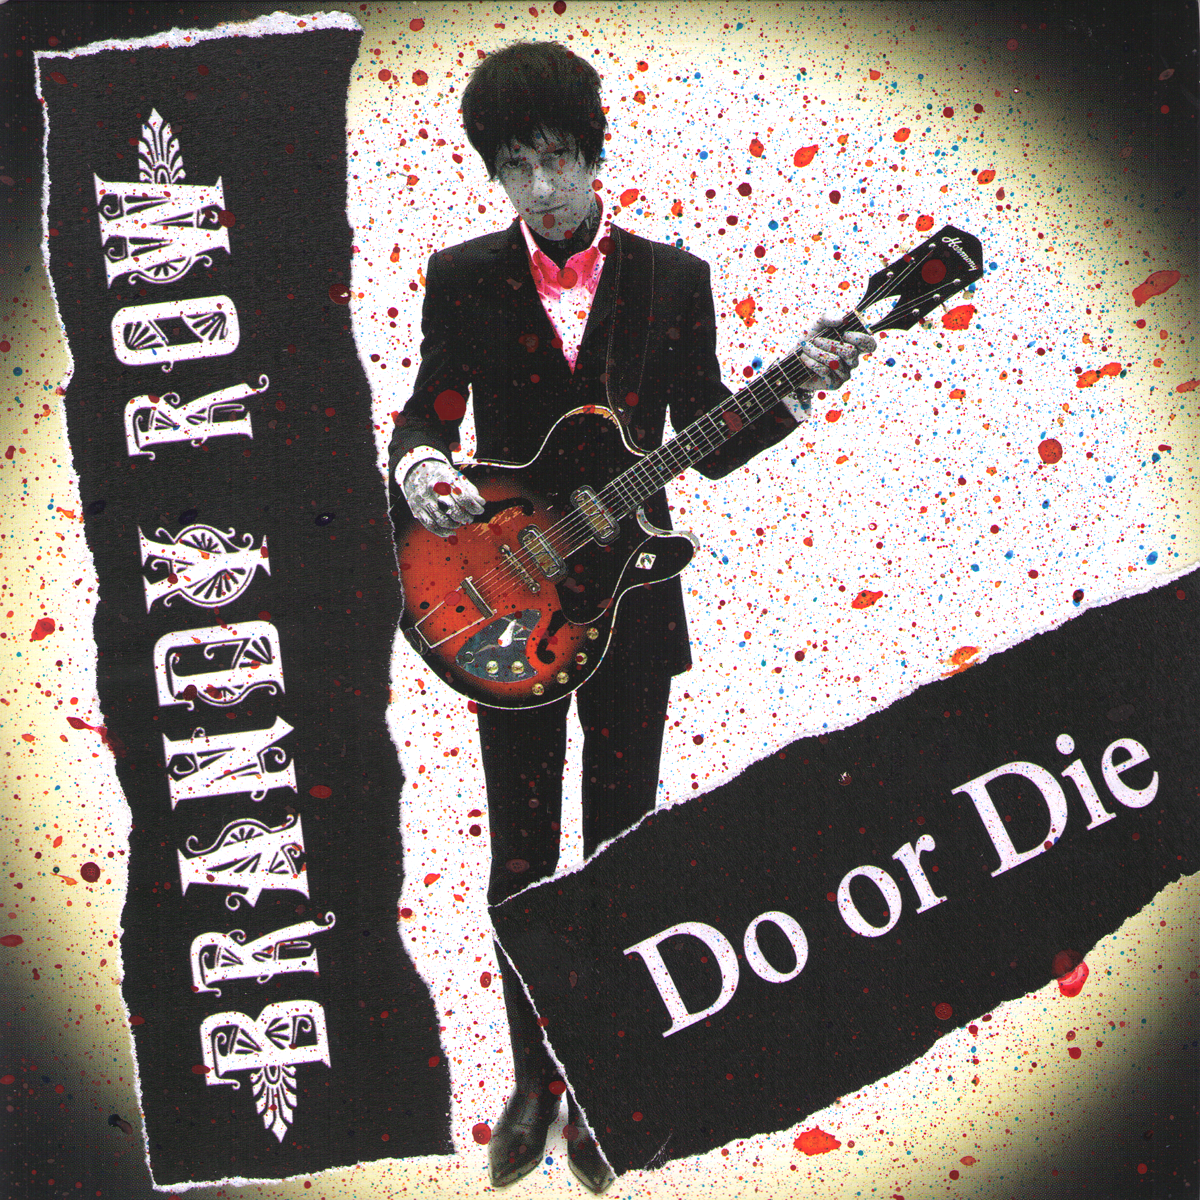 Brandy Row- Do Or Die 7” ~RAREST COLLAGE COVER LTD TO 30!